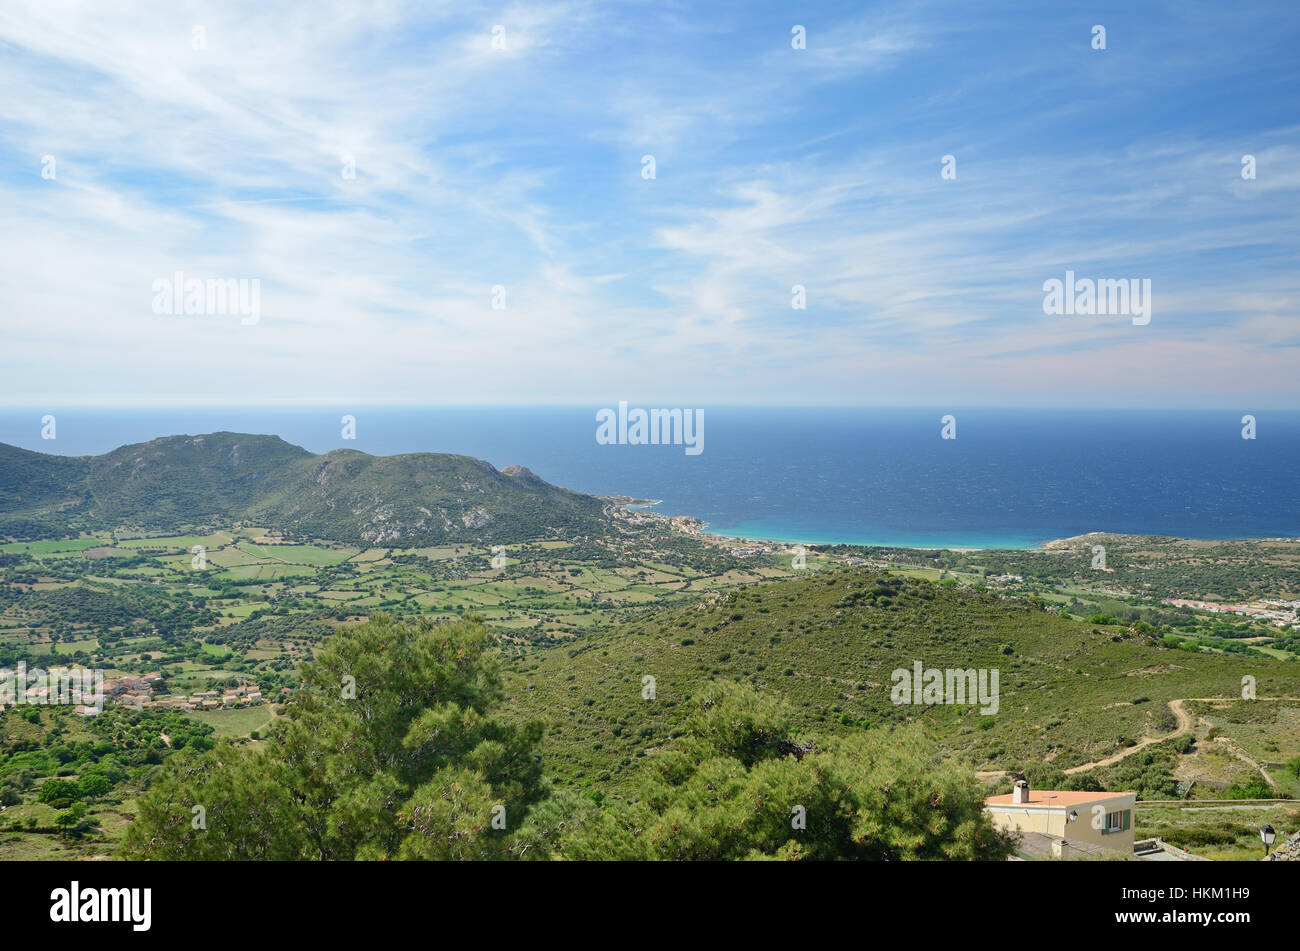 Balagne is also called the garden of Corsica because of its fertile grounds and extended agricultural activity. Stock Photo